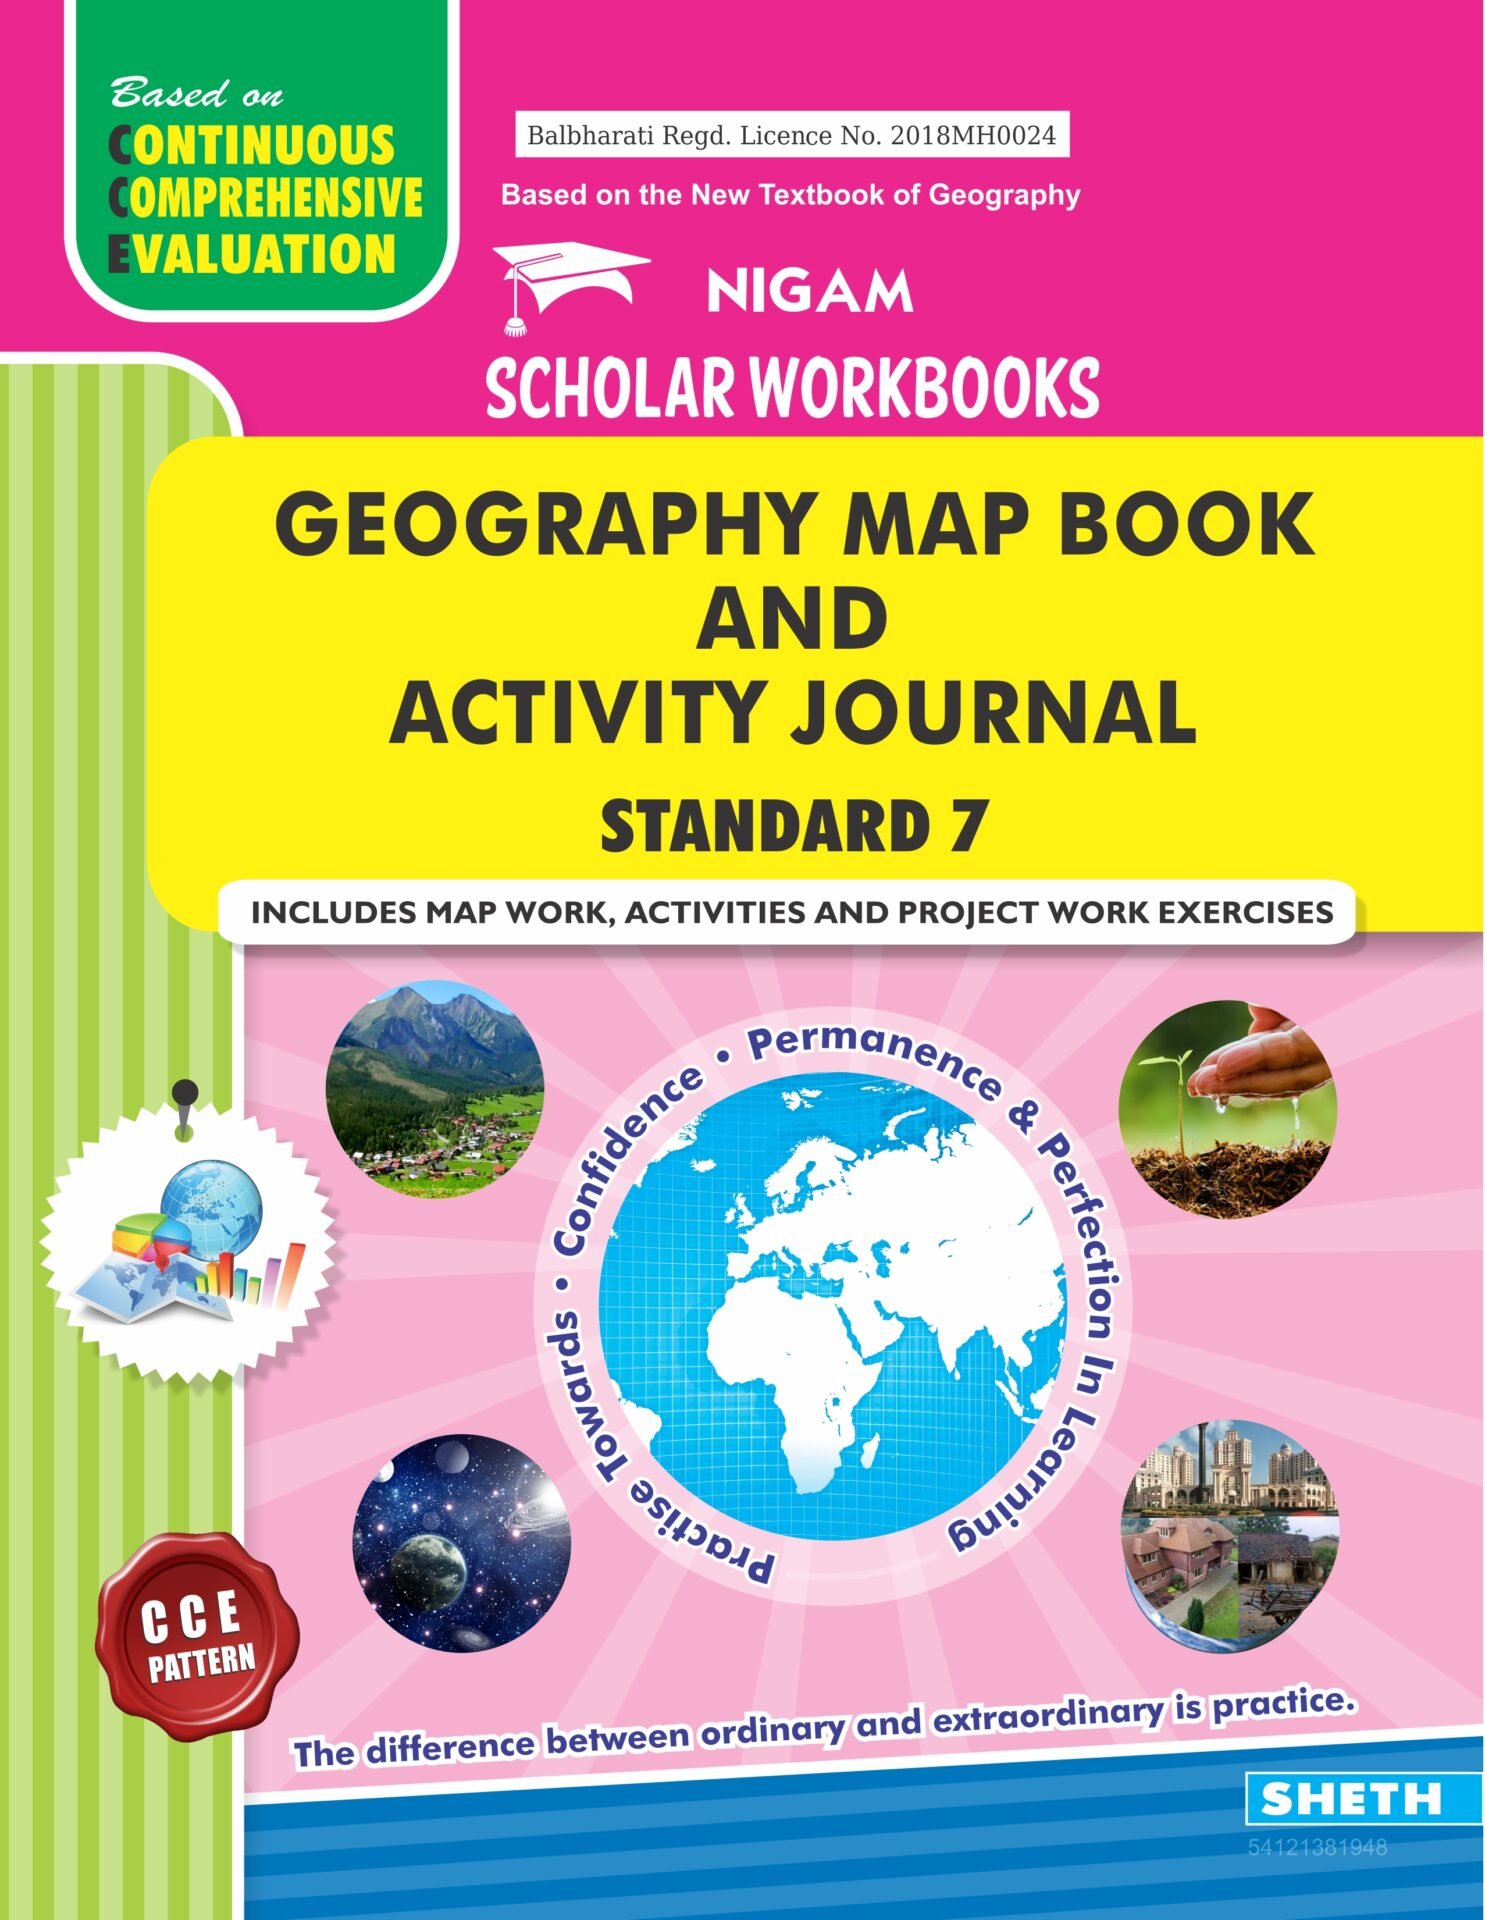 CCE Pattern Nigam Scholar Workbooks Geography Map Book and Activity Journal Standard 7 1